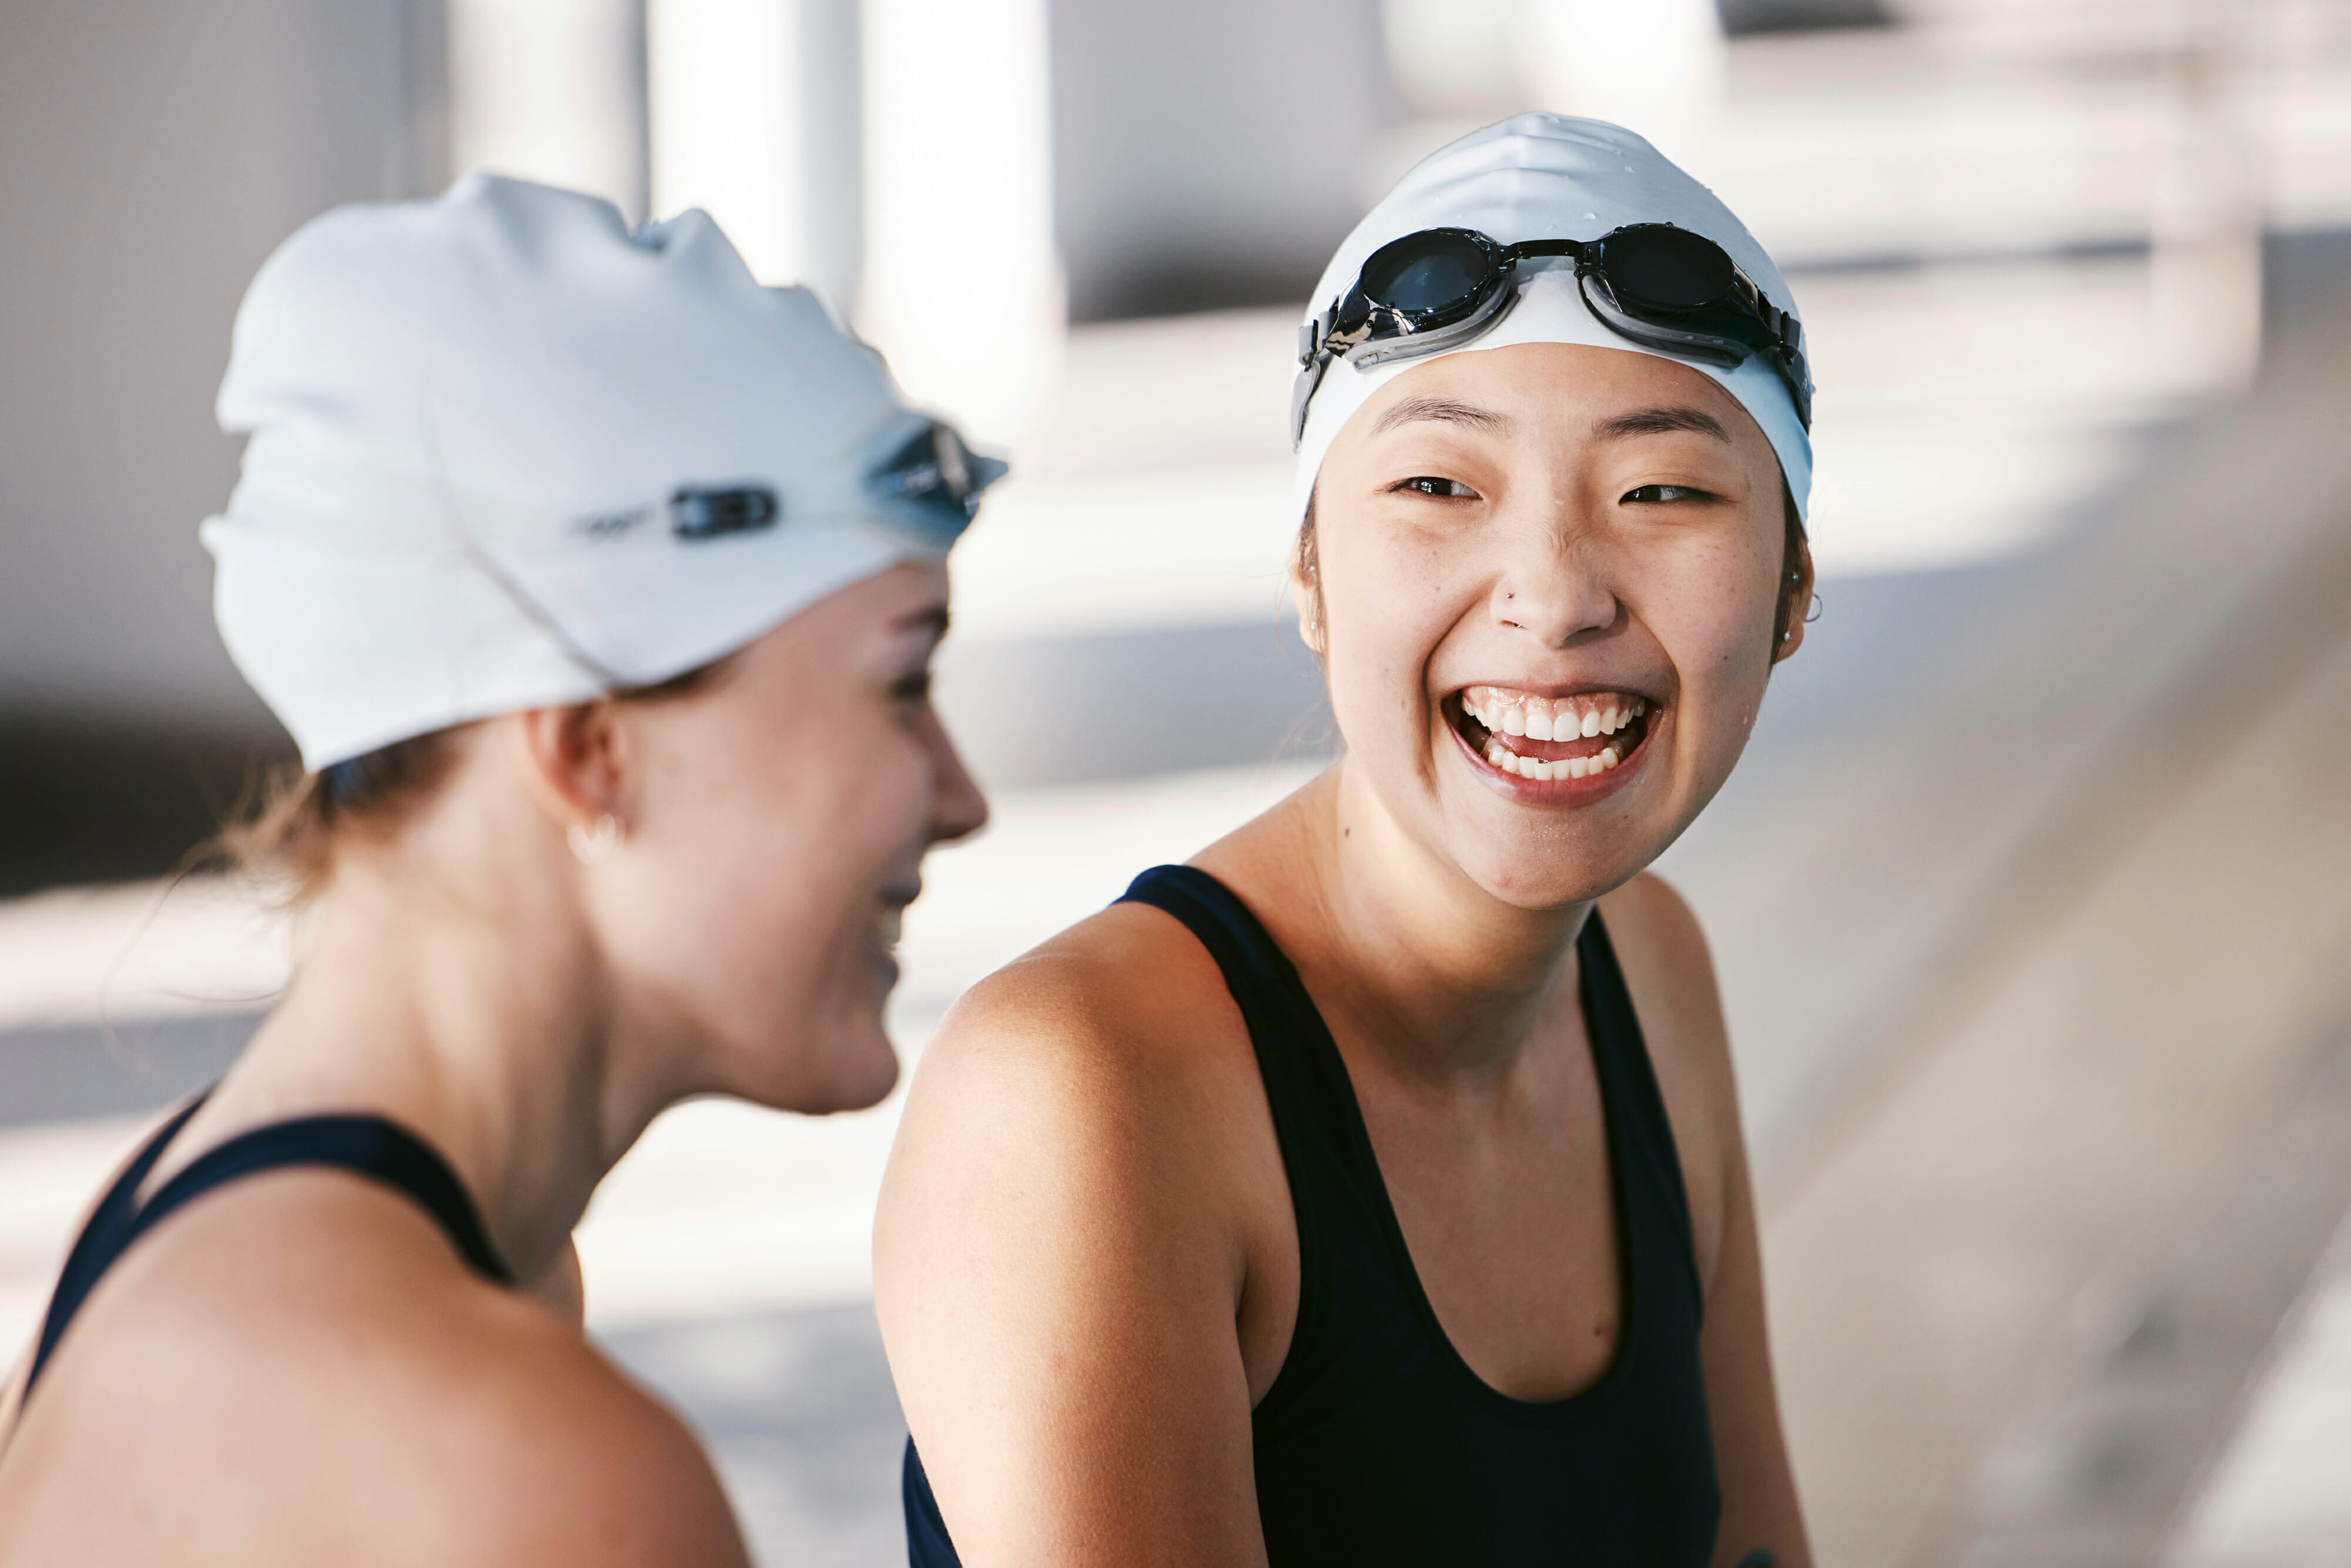 Female swimmers laughing and having fun during training in the swimming pool